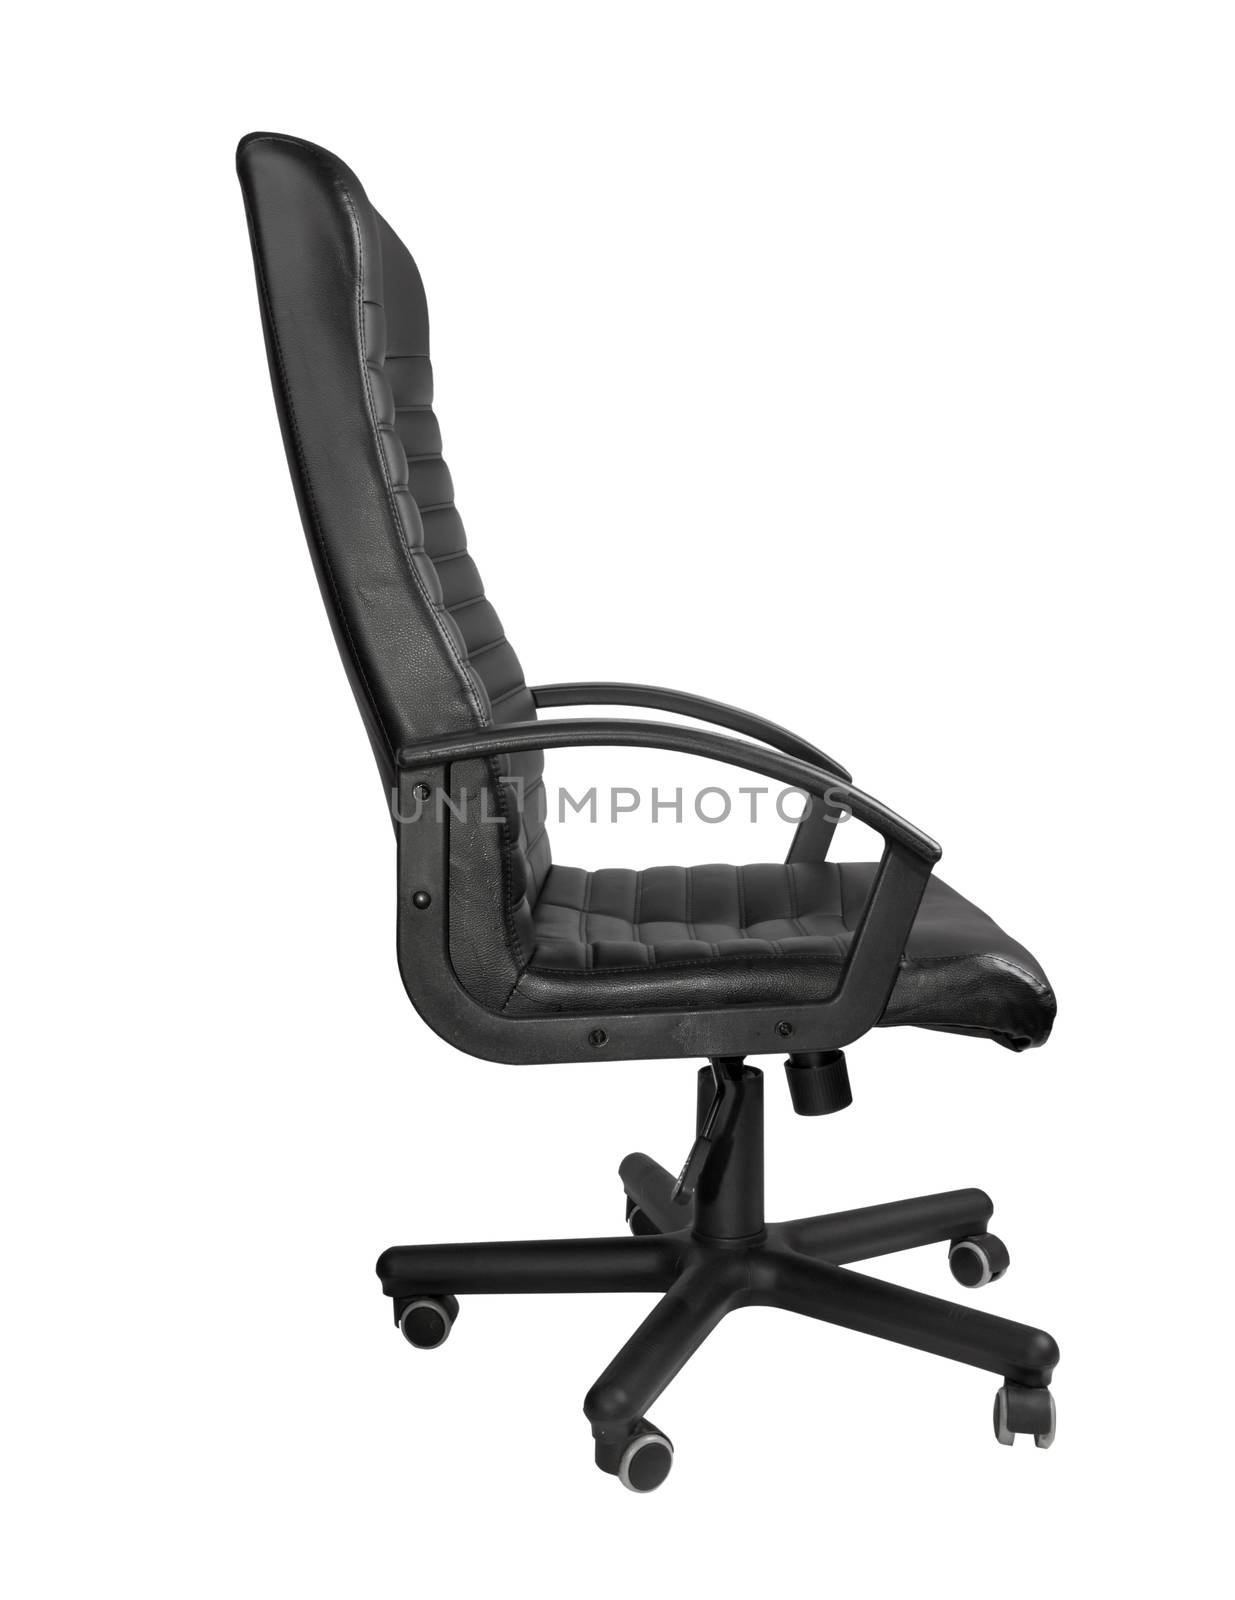 Black leather office chair on white background 